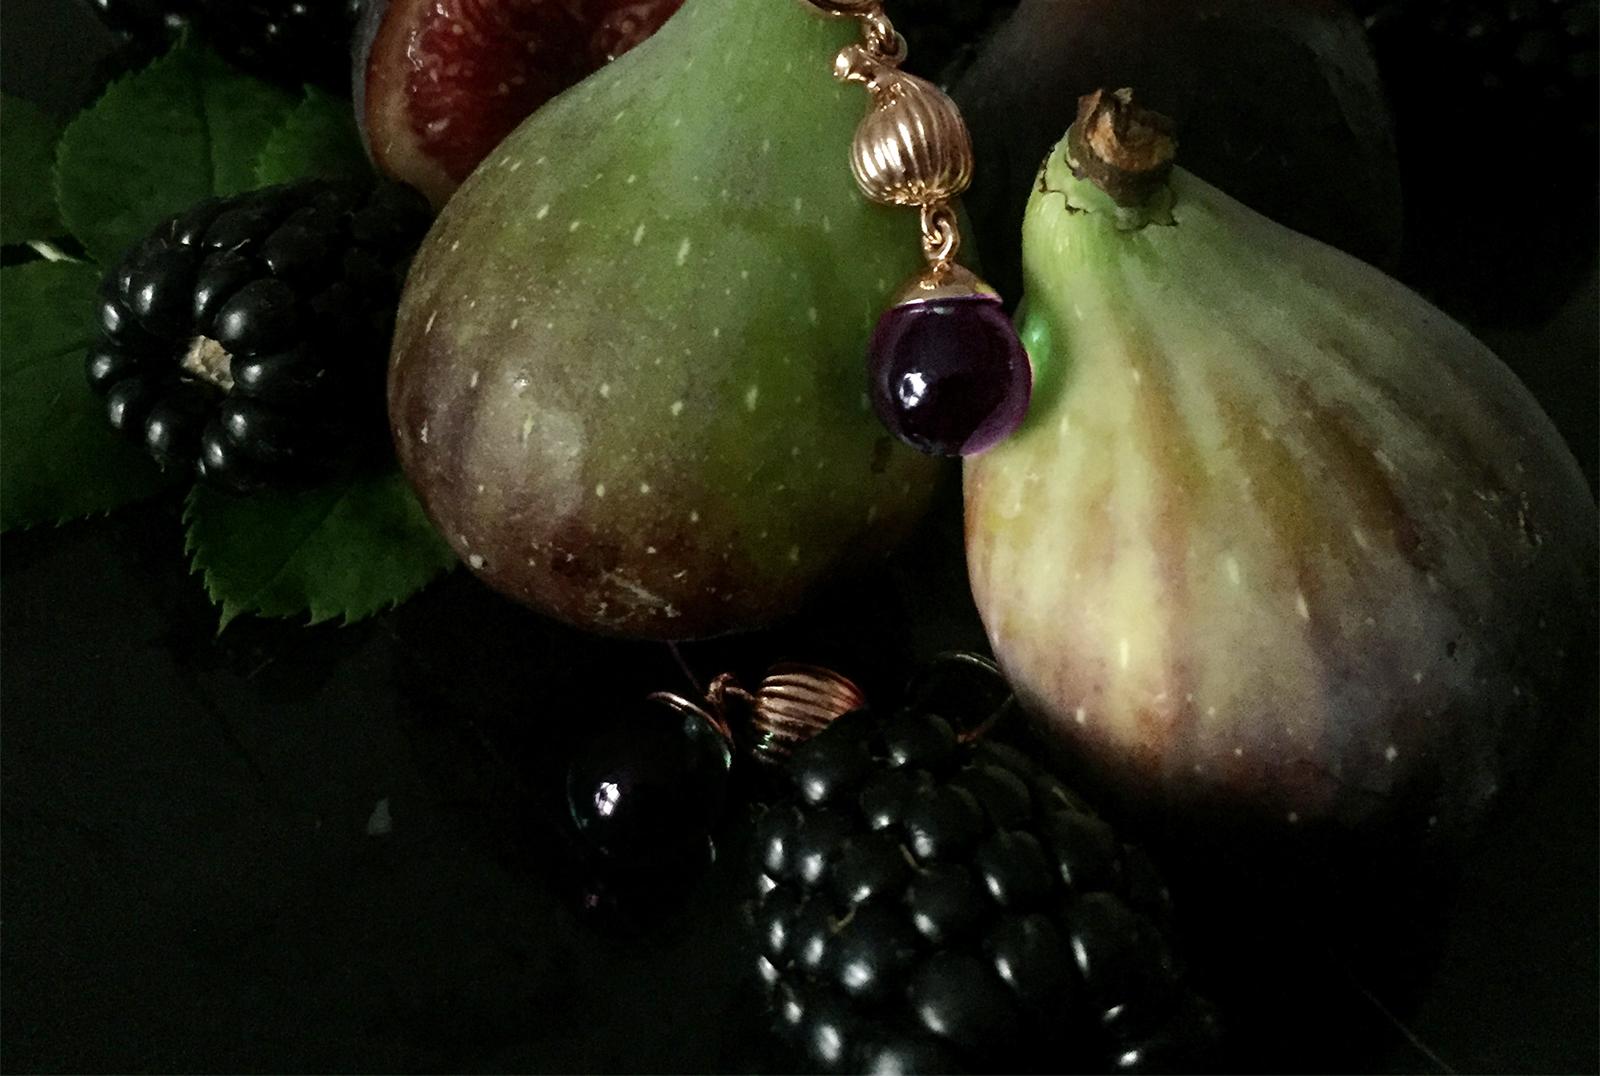 18-karat yellow gold Fig Fruits contemporary cocktail drop earrings feature cabochon natural vivid amethyst drops that allow light to pass through. These earrings were showcased in a Vogue UA review.

The sweet concept of a favorite fruit combined